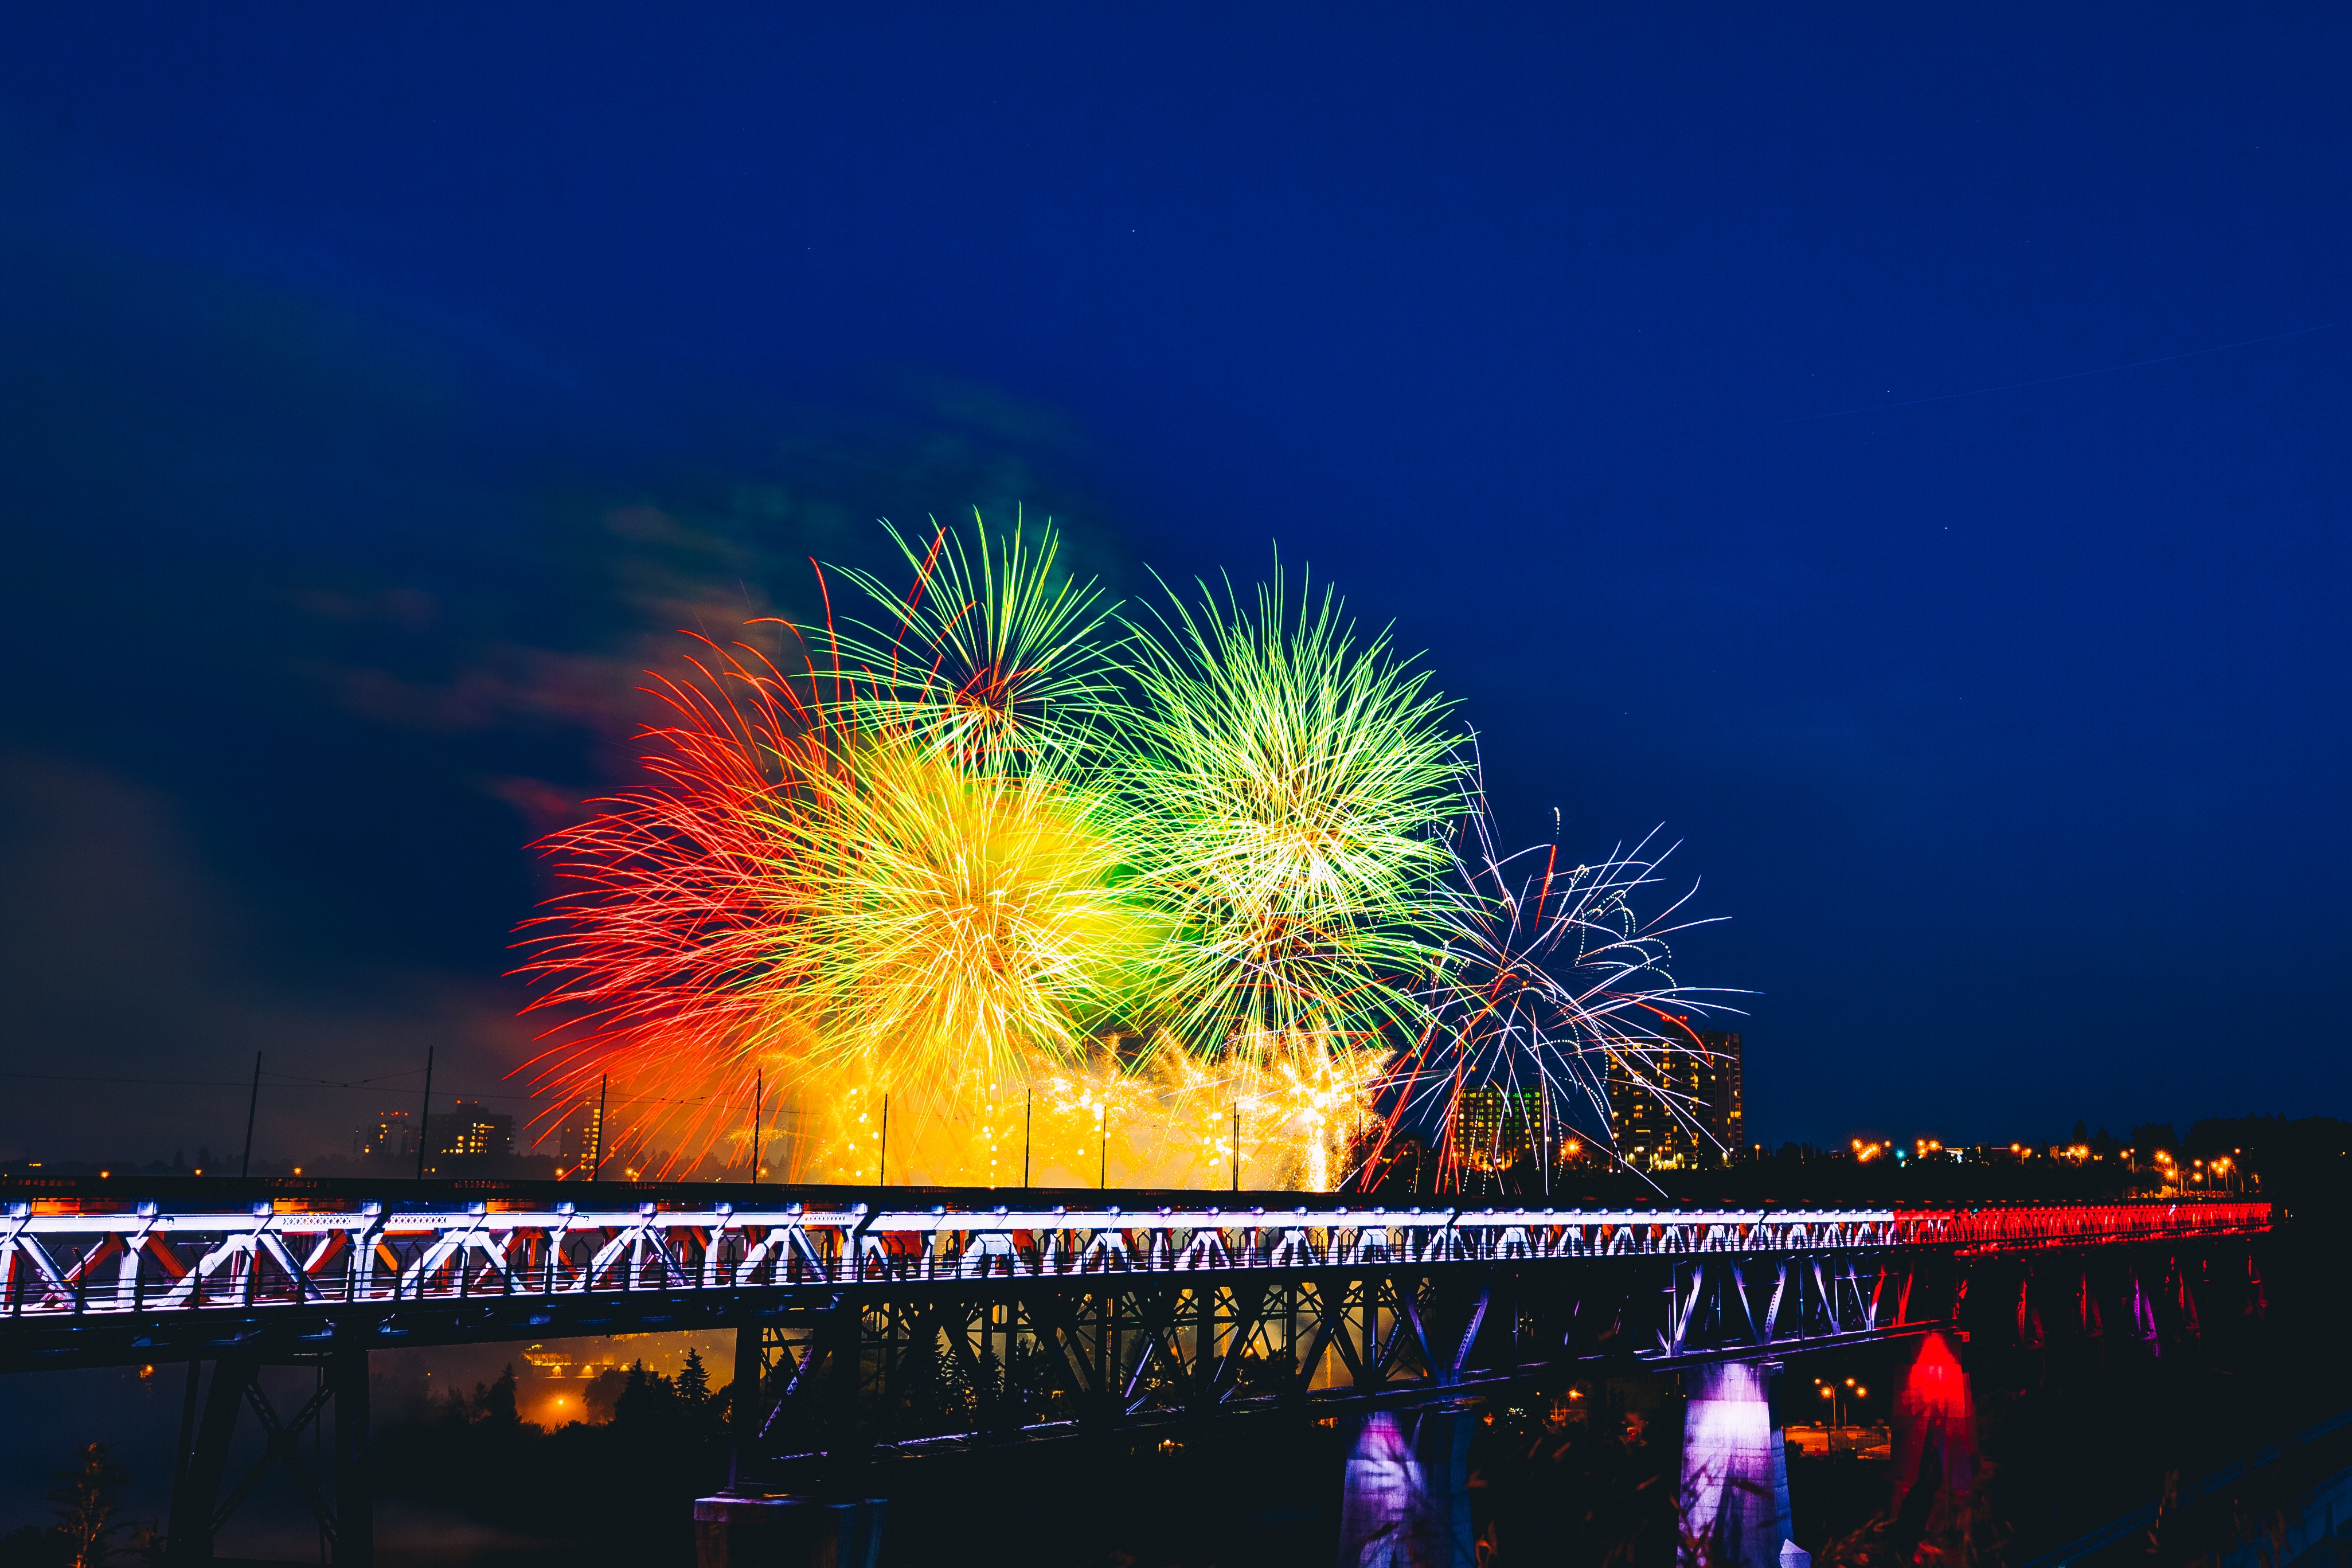 holidays, bridge, fireworks, holiday home screen for smartphone